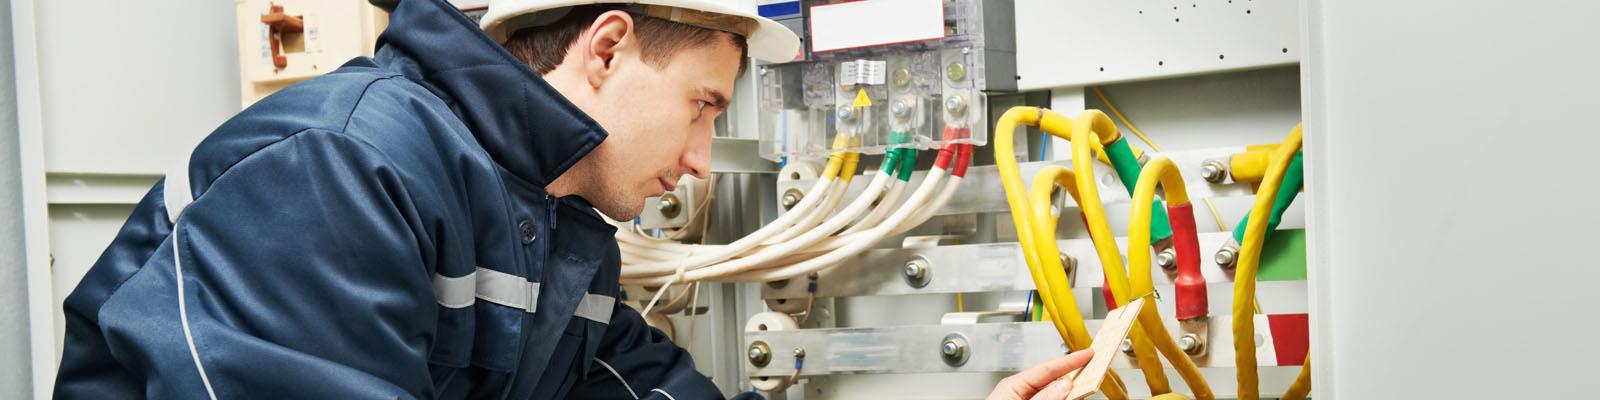 Electrical engineer examining wires